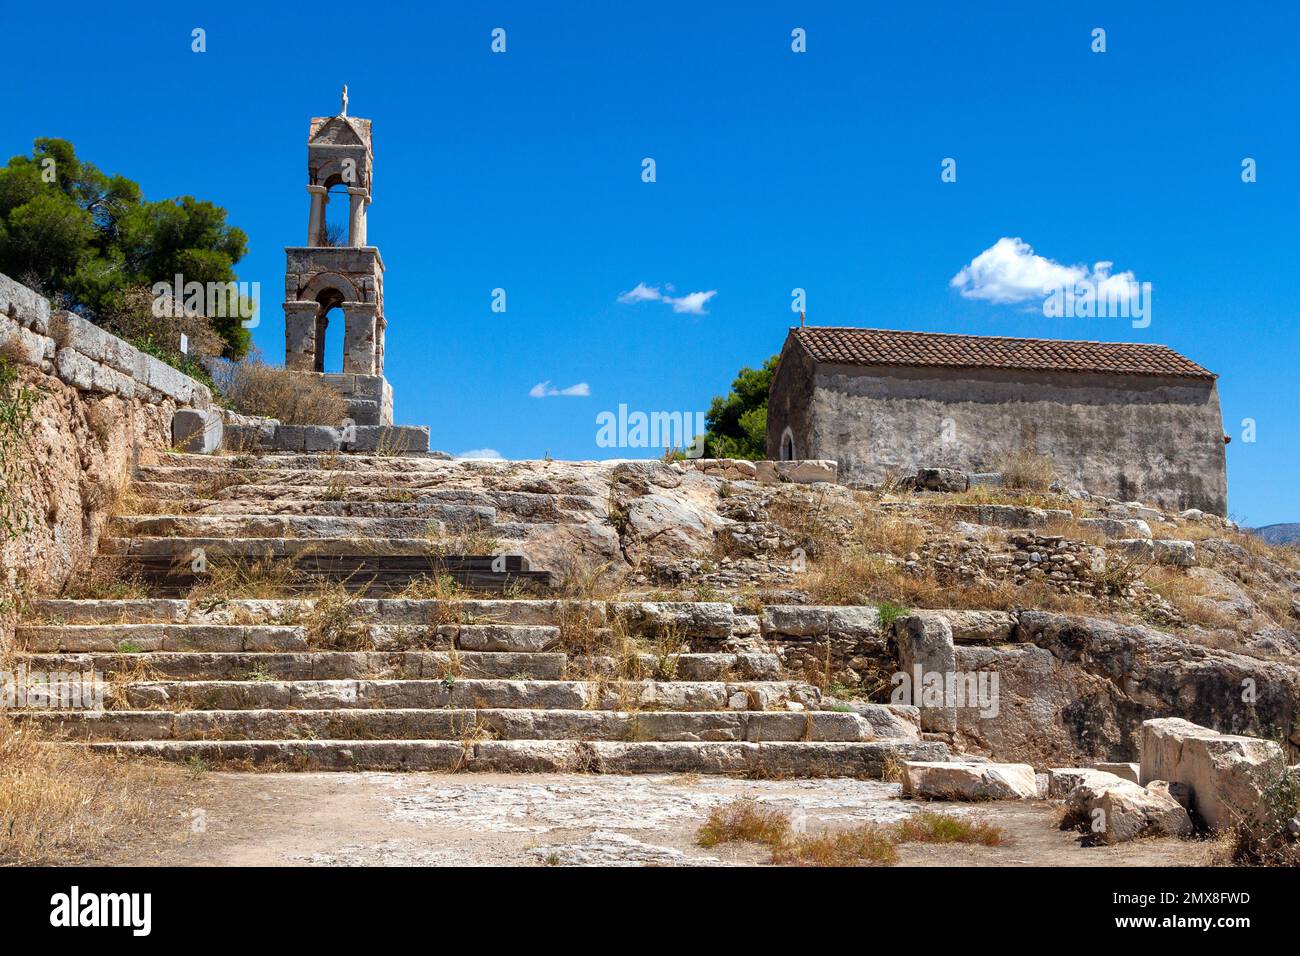 The sanctuary of Eleusis (Elefsina), one of the most important religious centers of the ancient world, where the goddess Demeter was worshipped. Stock Photo